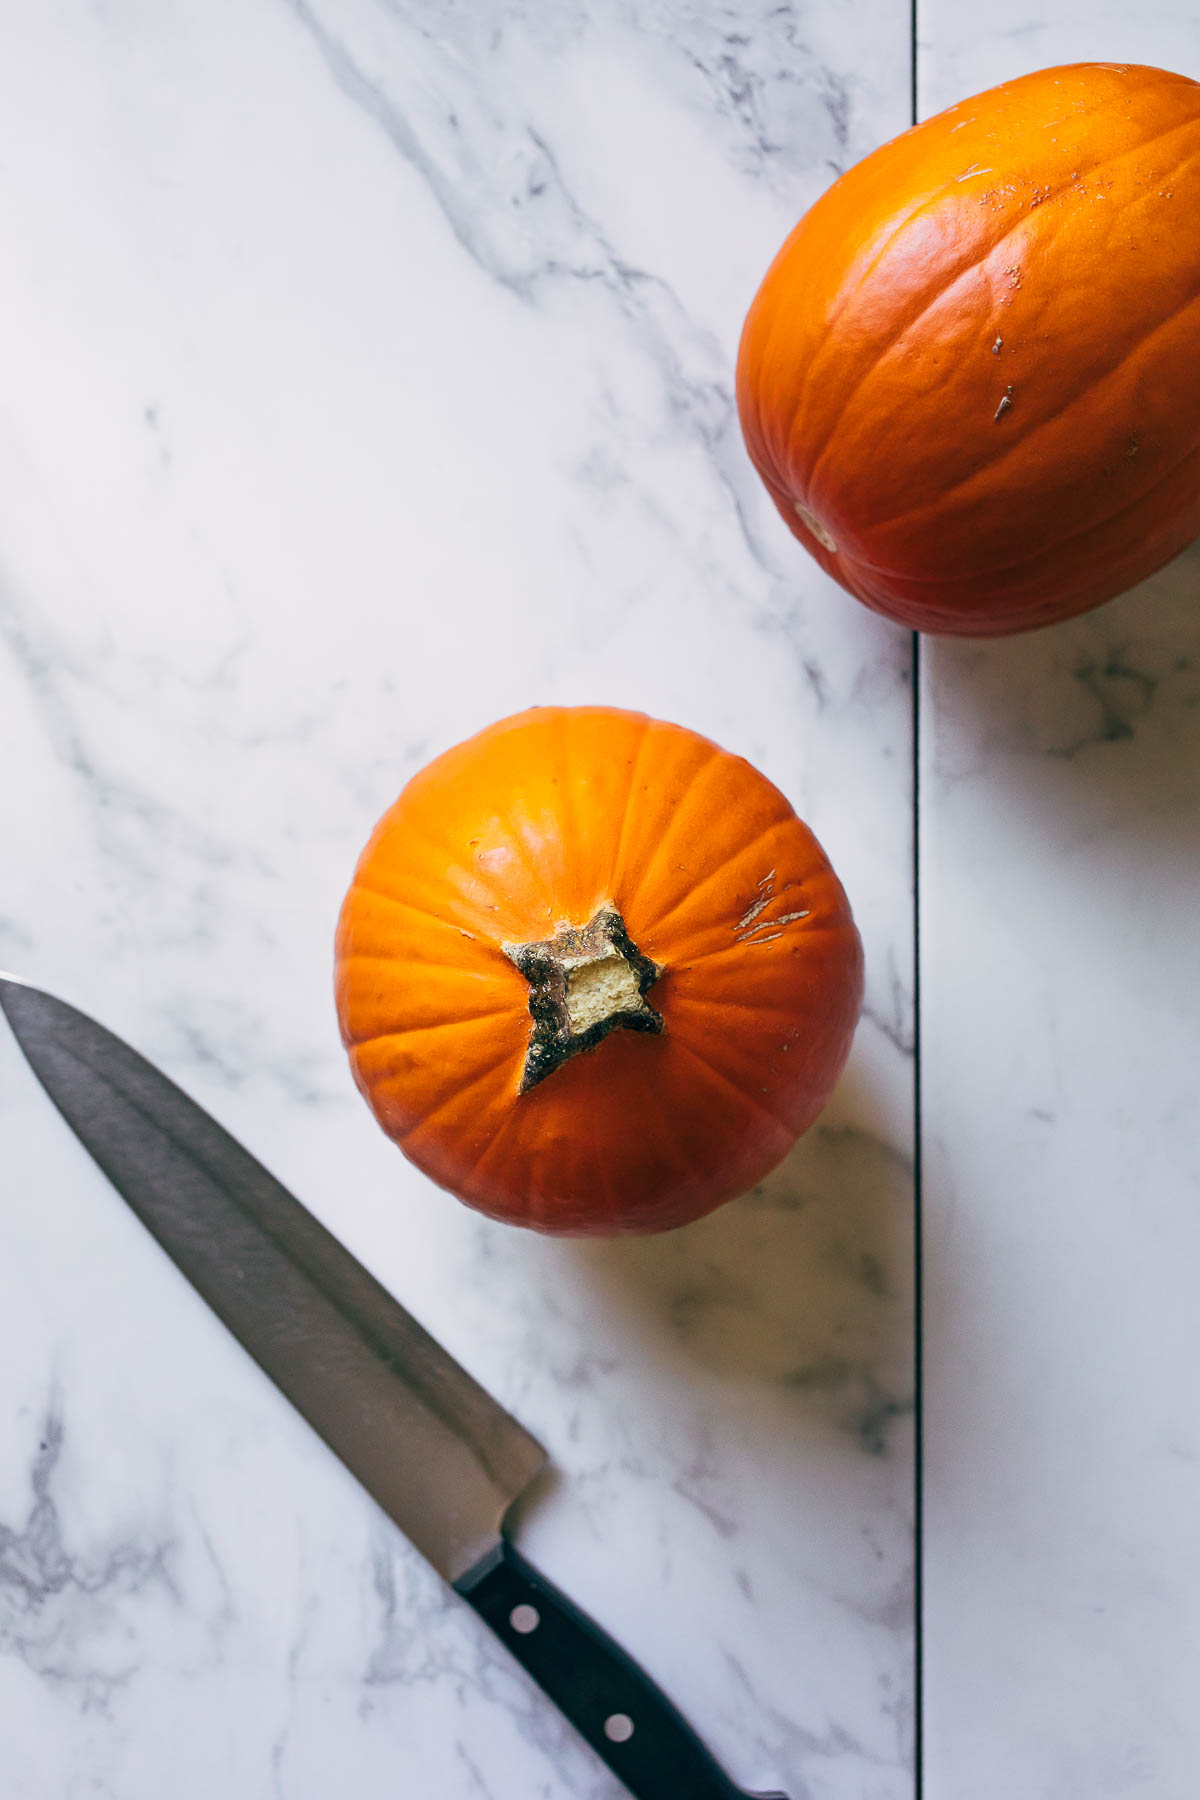 Two small sugar pumpkins on a marble surface alongside a chef's knife.